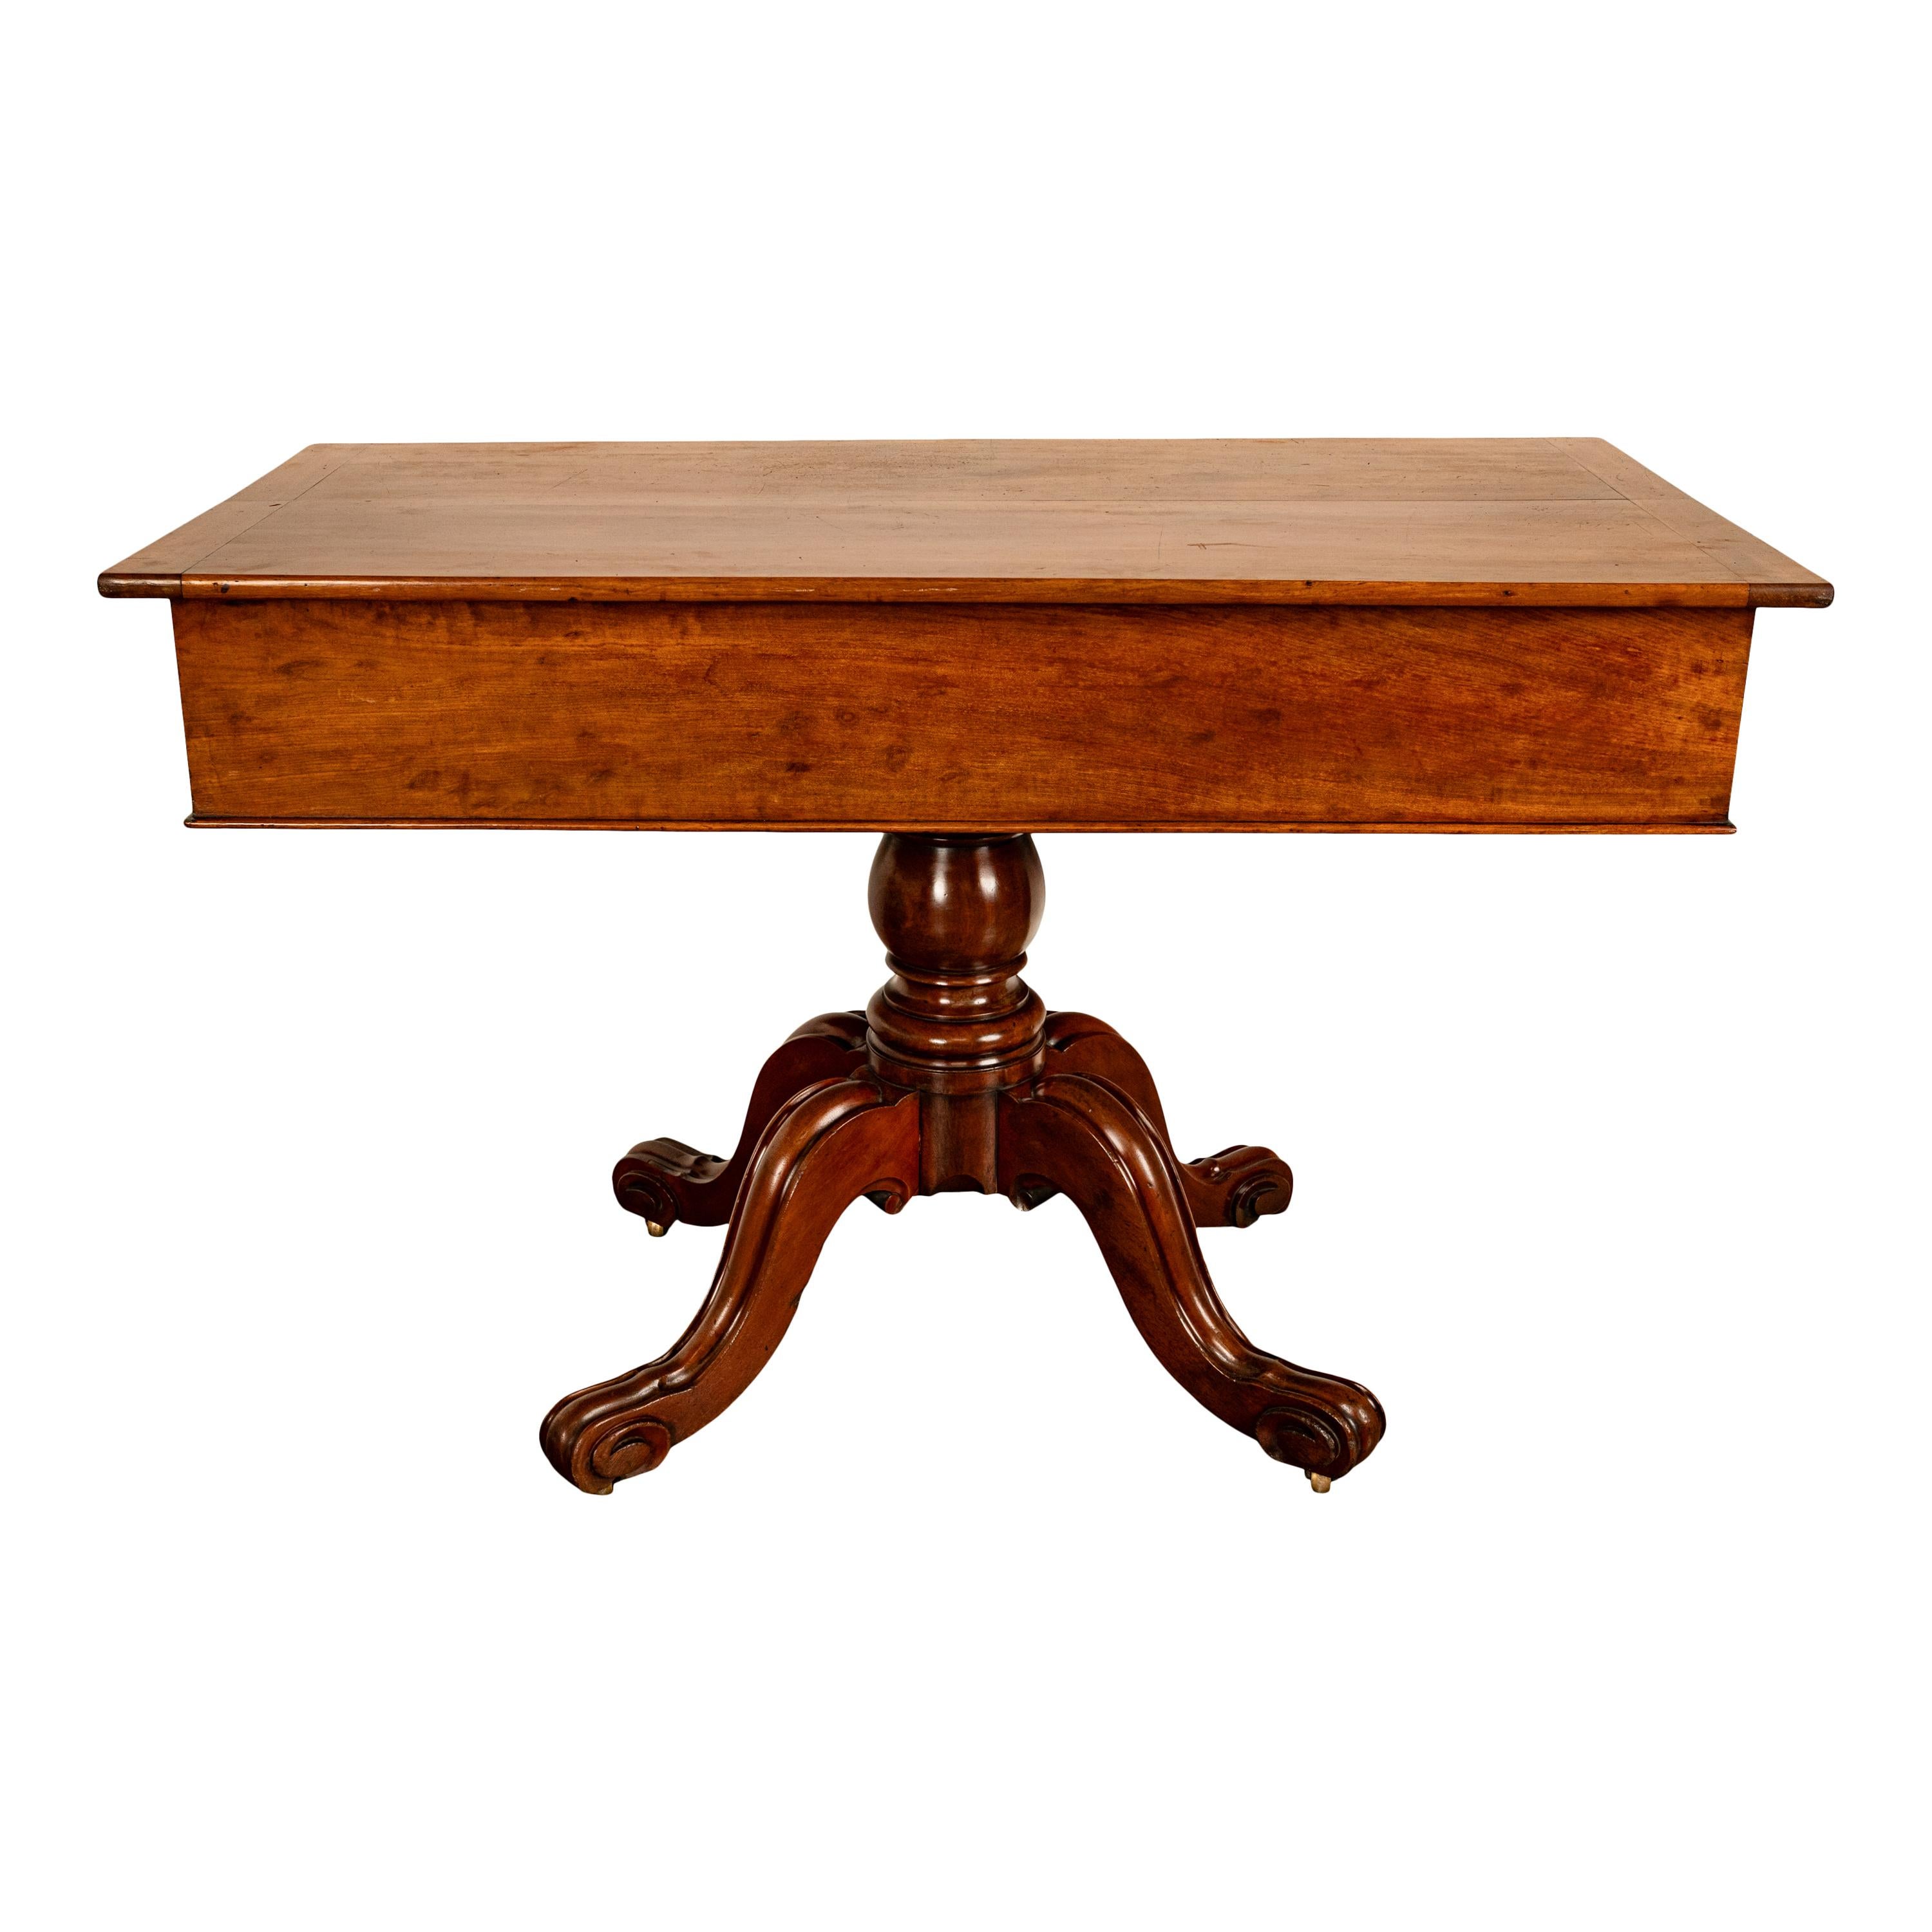 Late 19th Century Antique 19th Century Architect's Mahogany Pedestal Desk Drafting Table 1870 For Sale